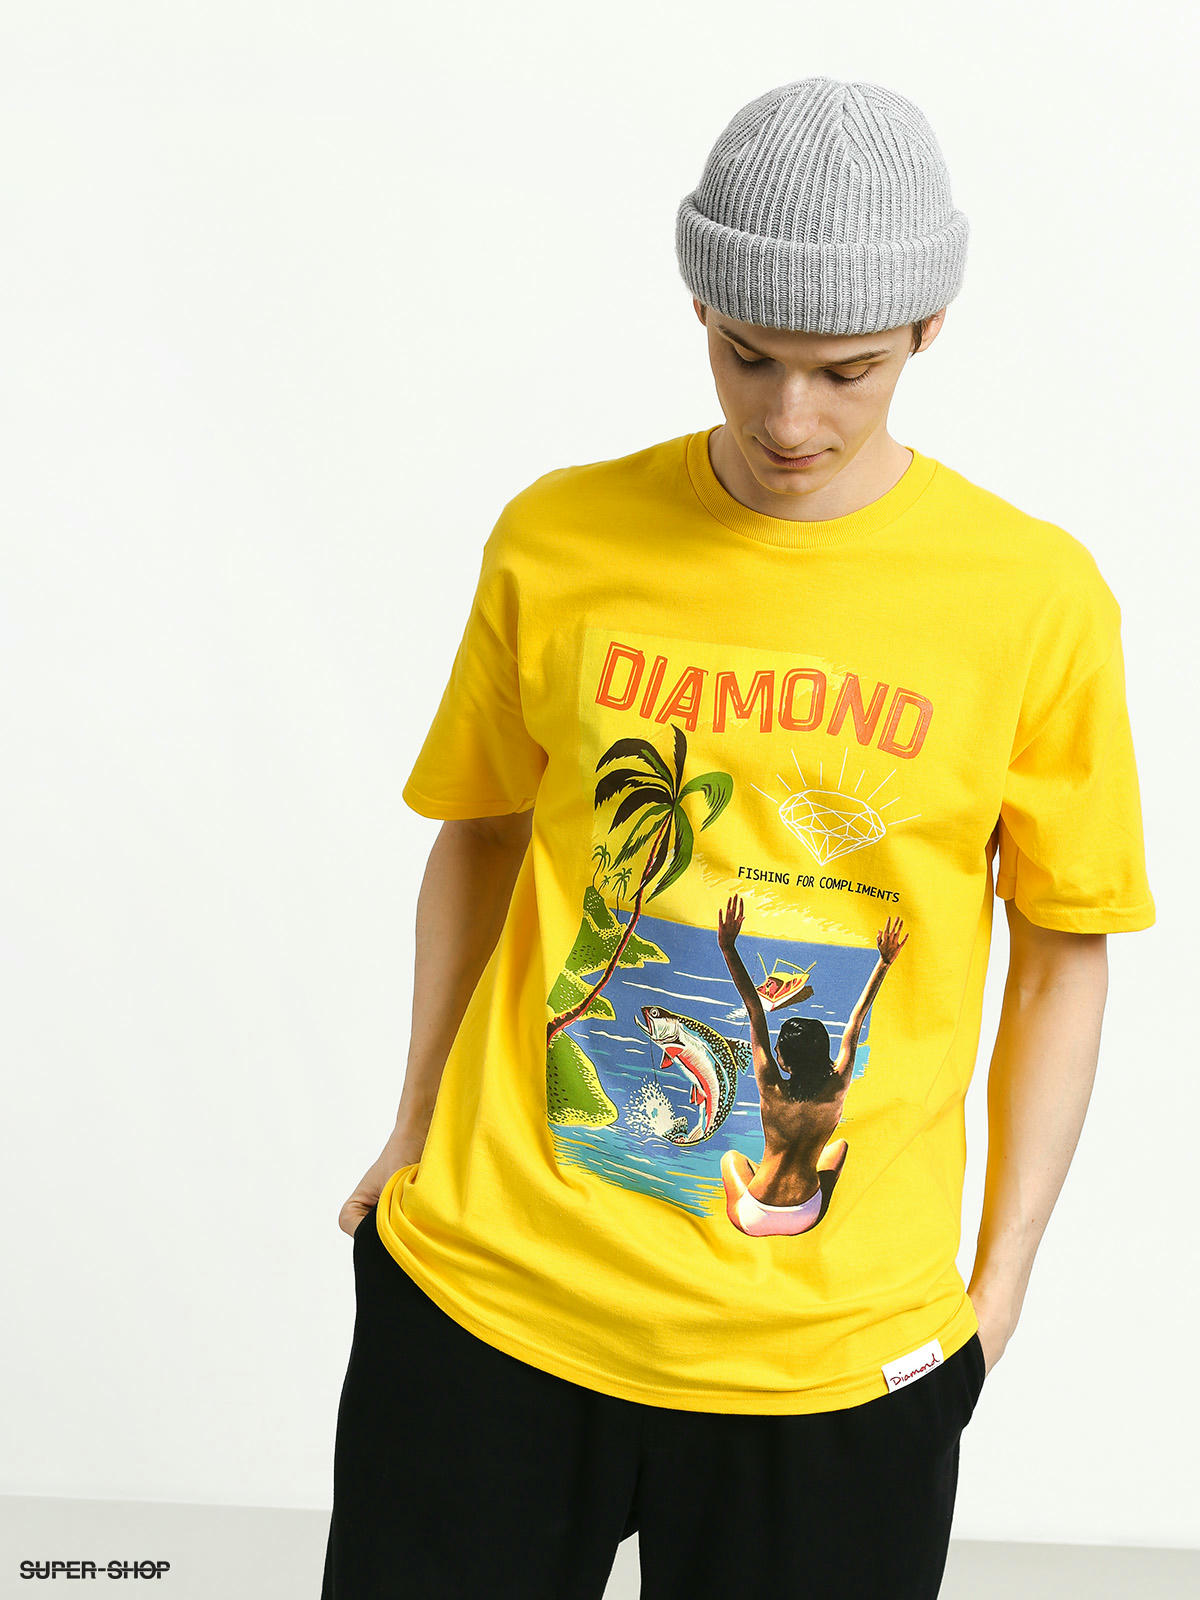 Diamond Supply Co. Fishing For Compliments Skate T-Shirt - Yellow Size